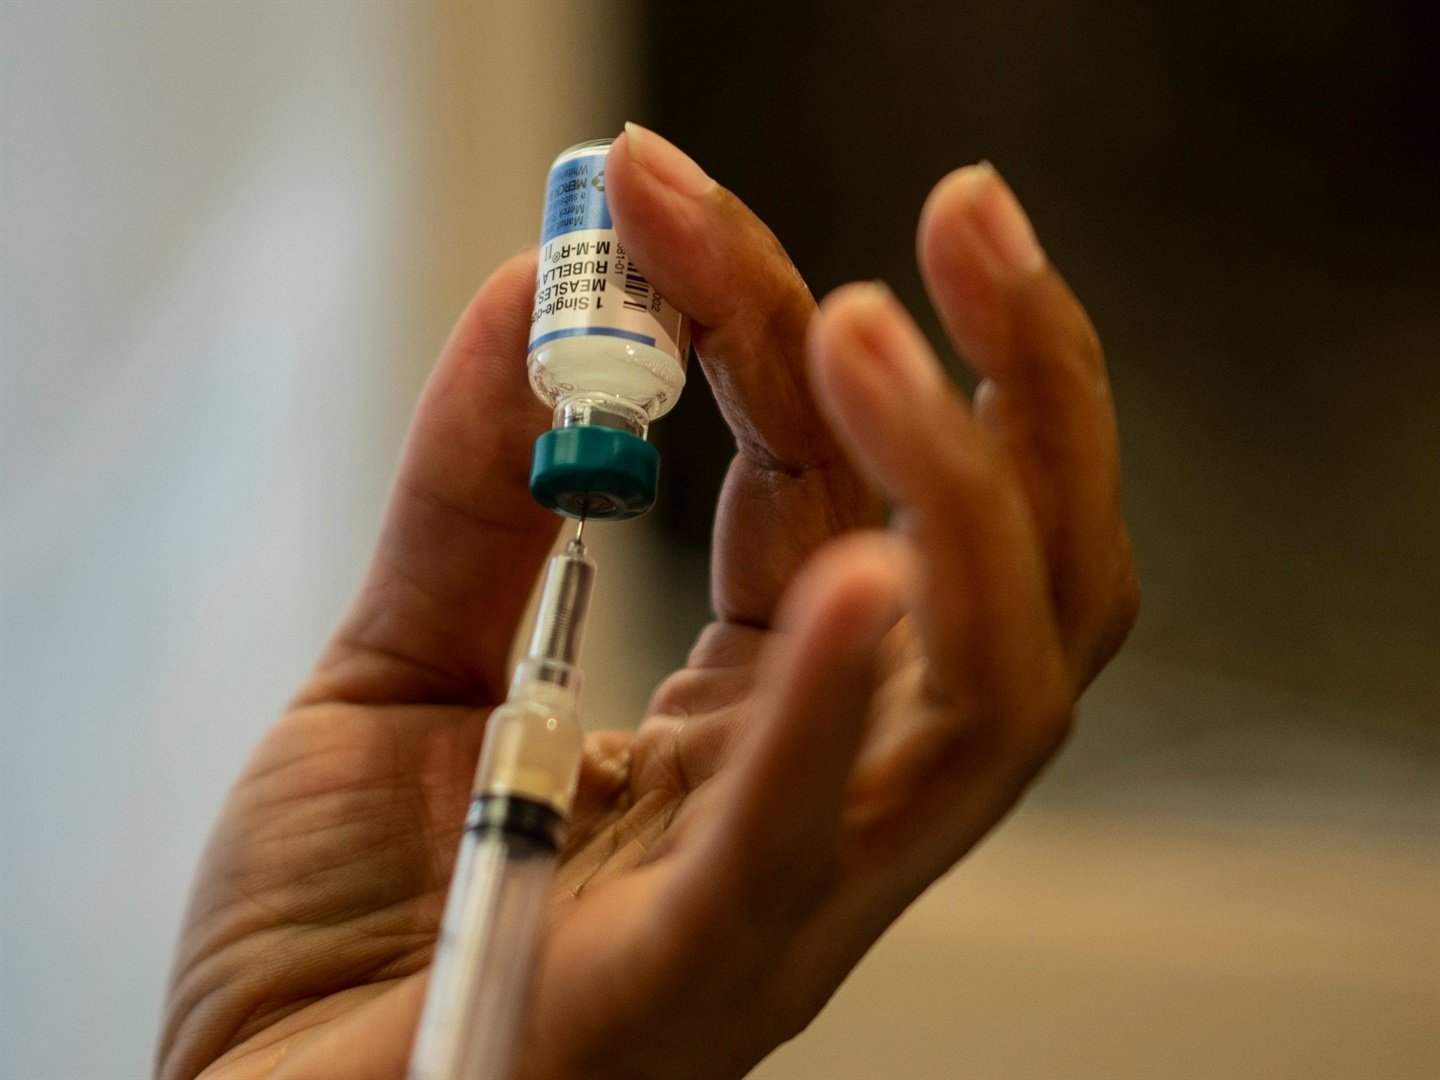 Four laboratory-confirmed measles cases were reported in Cape Town between 24 January and 17 February, according to the NCID.